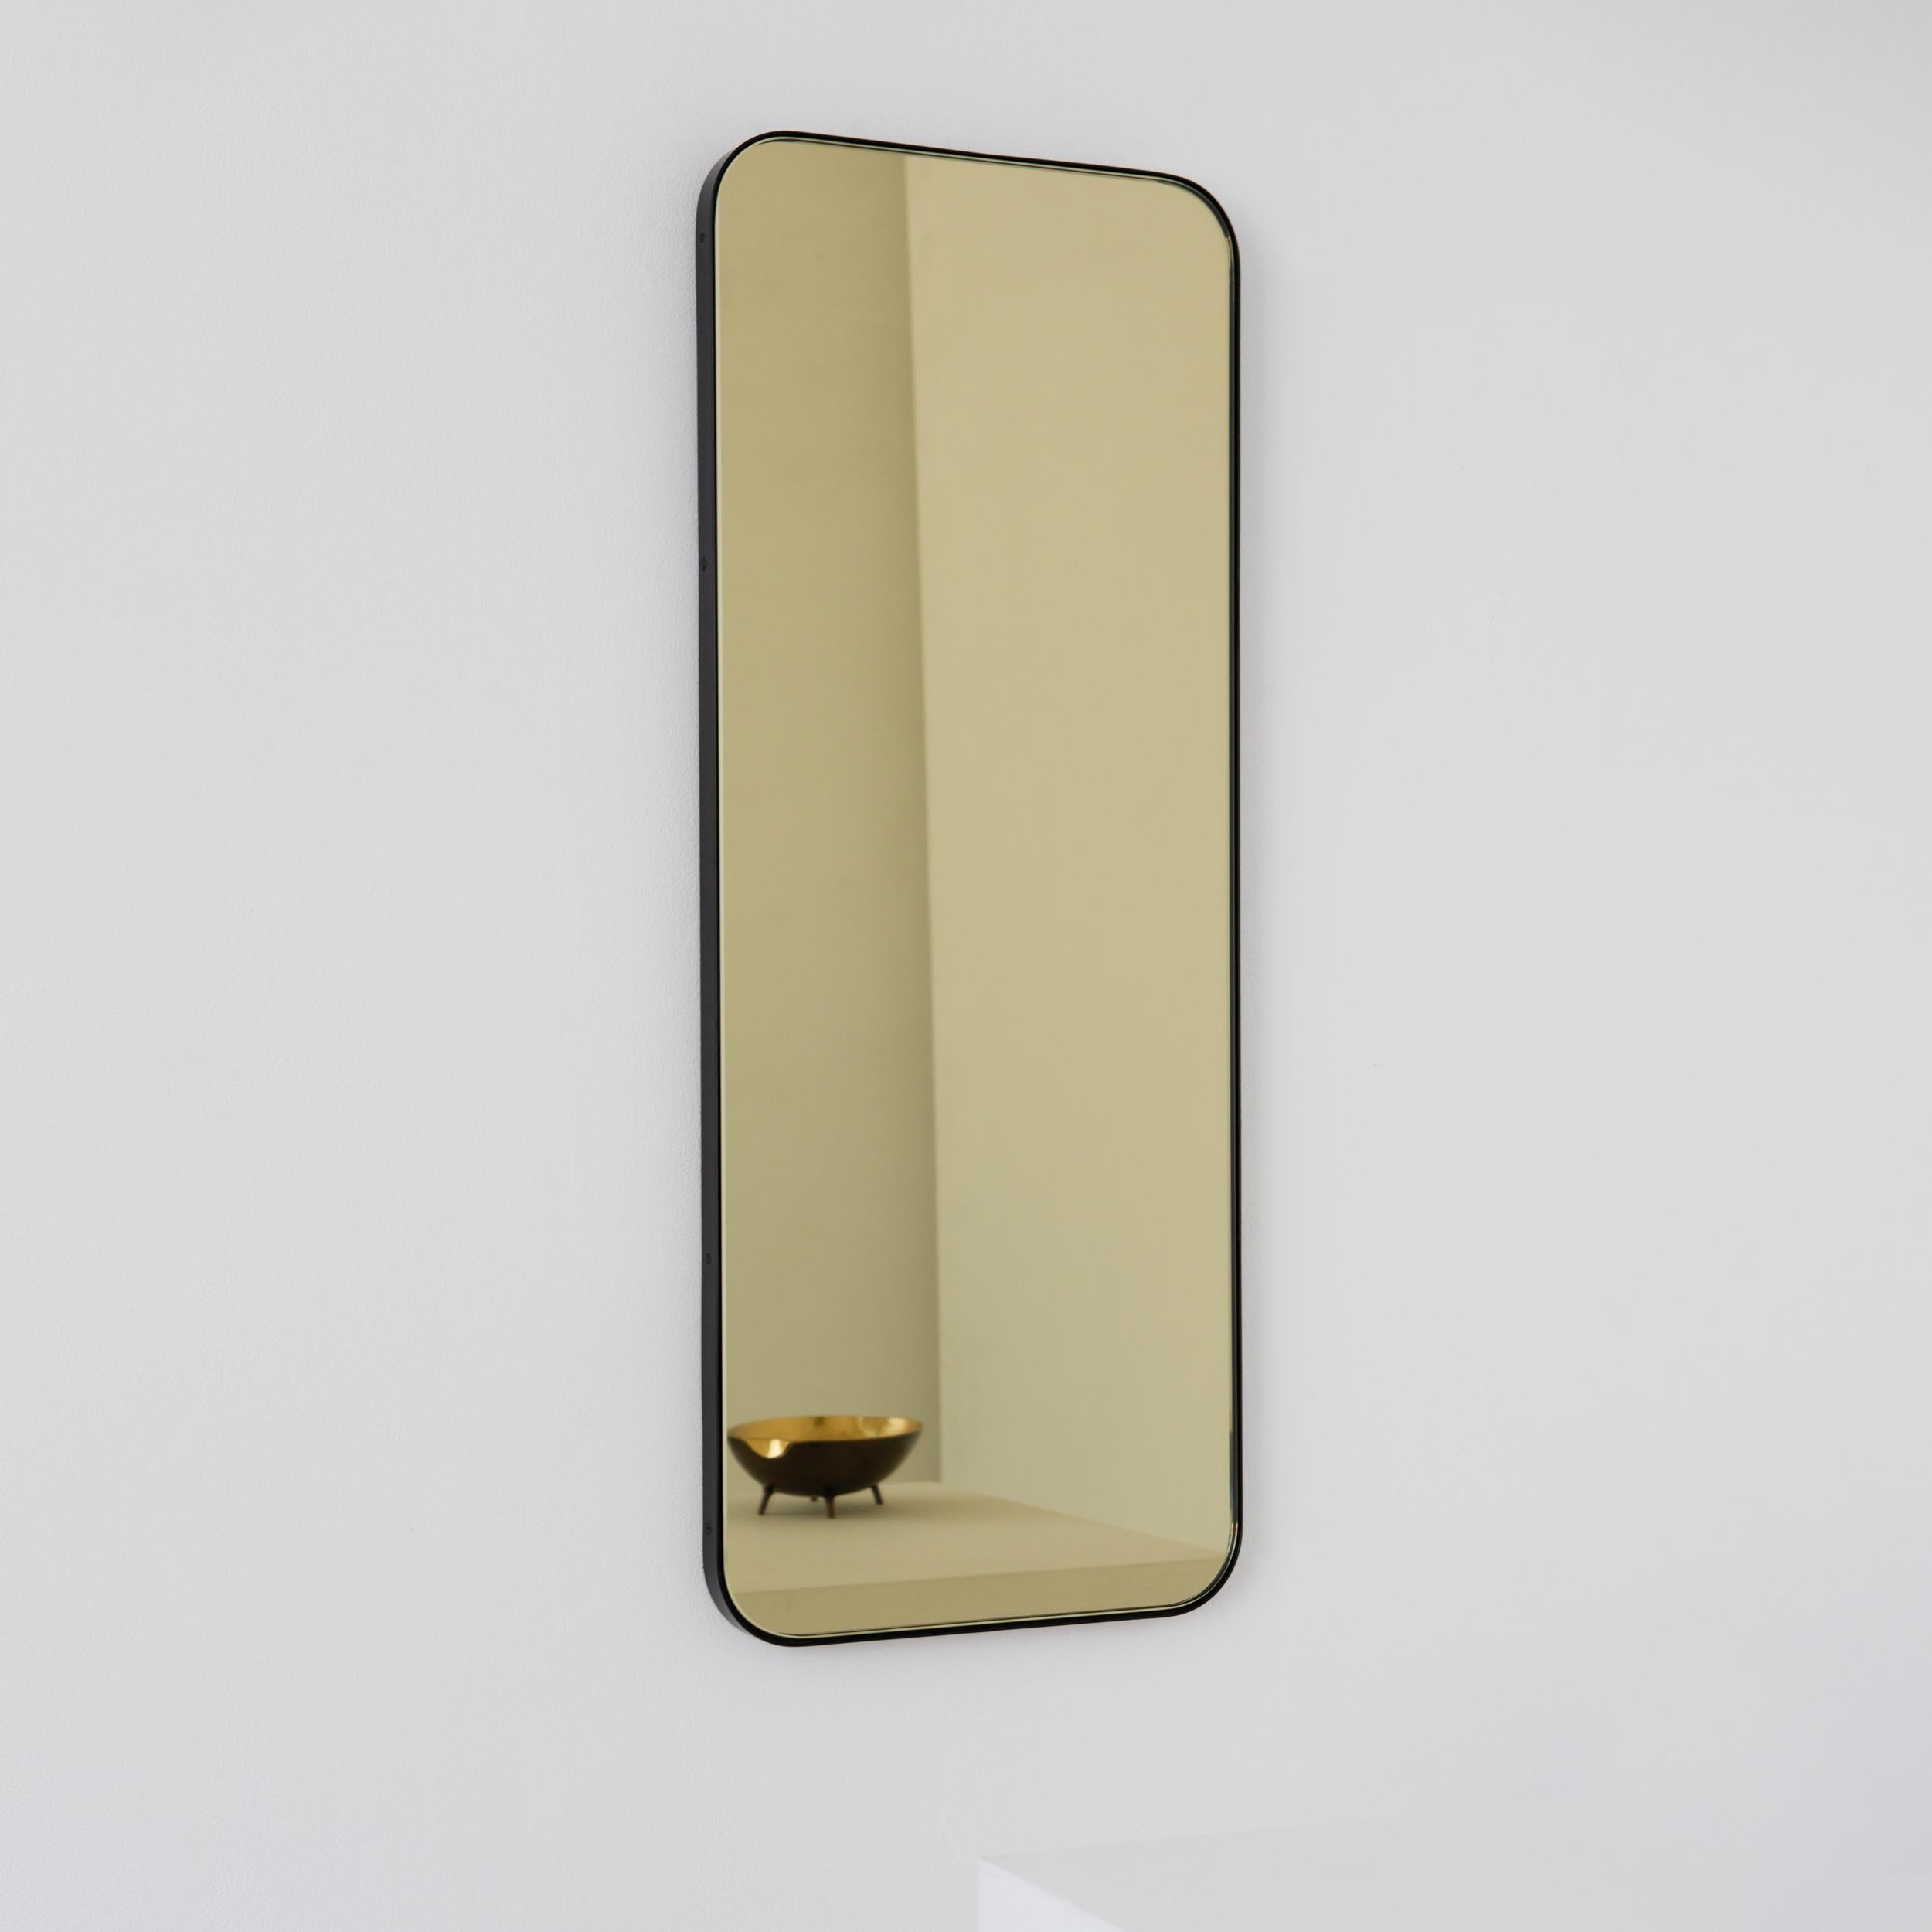 Modern gold tinted rectangular mirror with an elegant black frame. Part of the charming Quadris™ collection, designed and handcrafted in London, UK. 

Our mirrors are designed with an integrated French cleat (split batten) system that ensures the